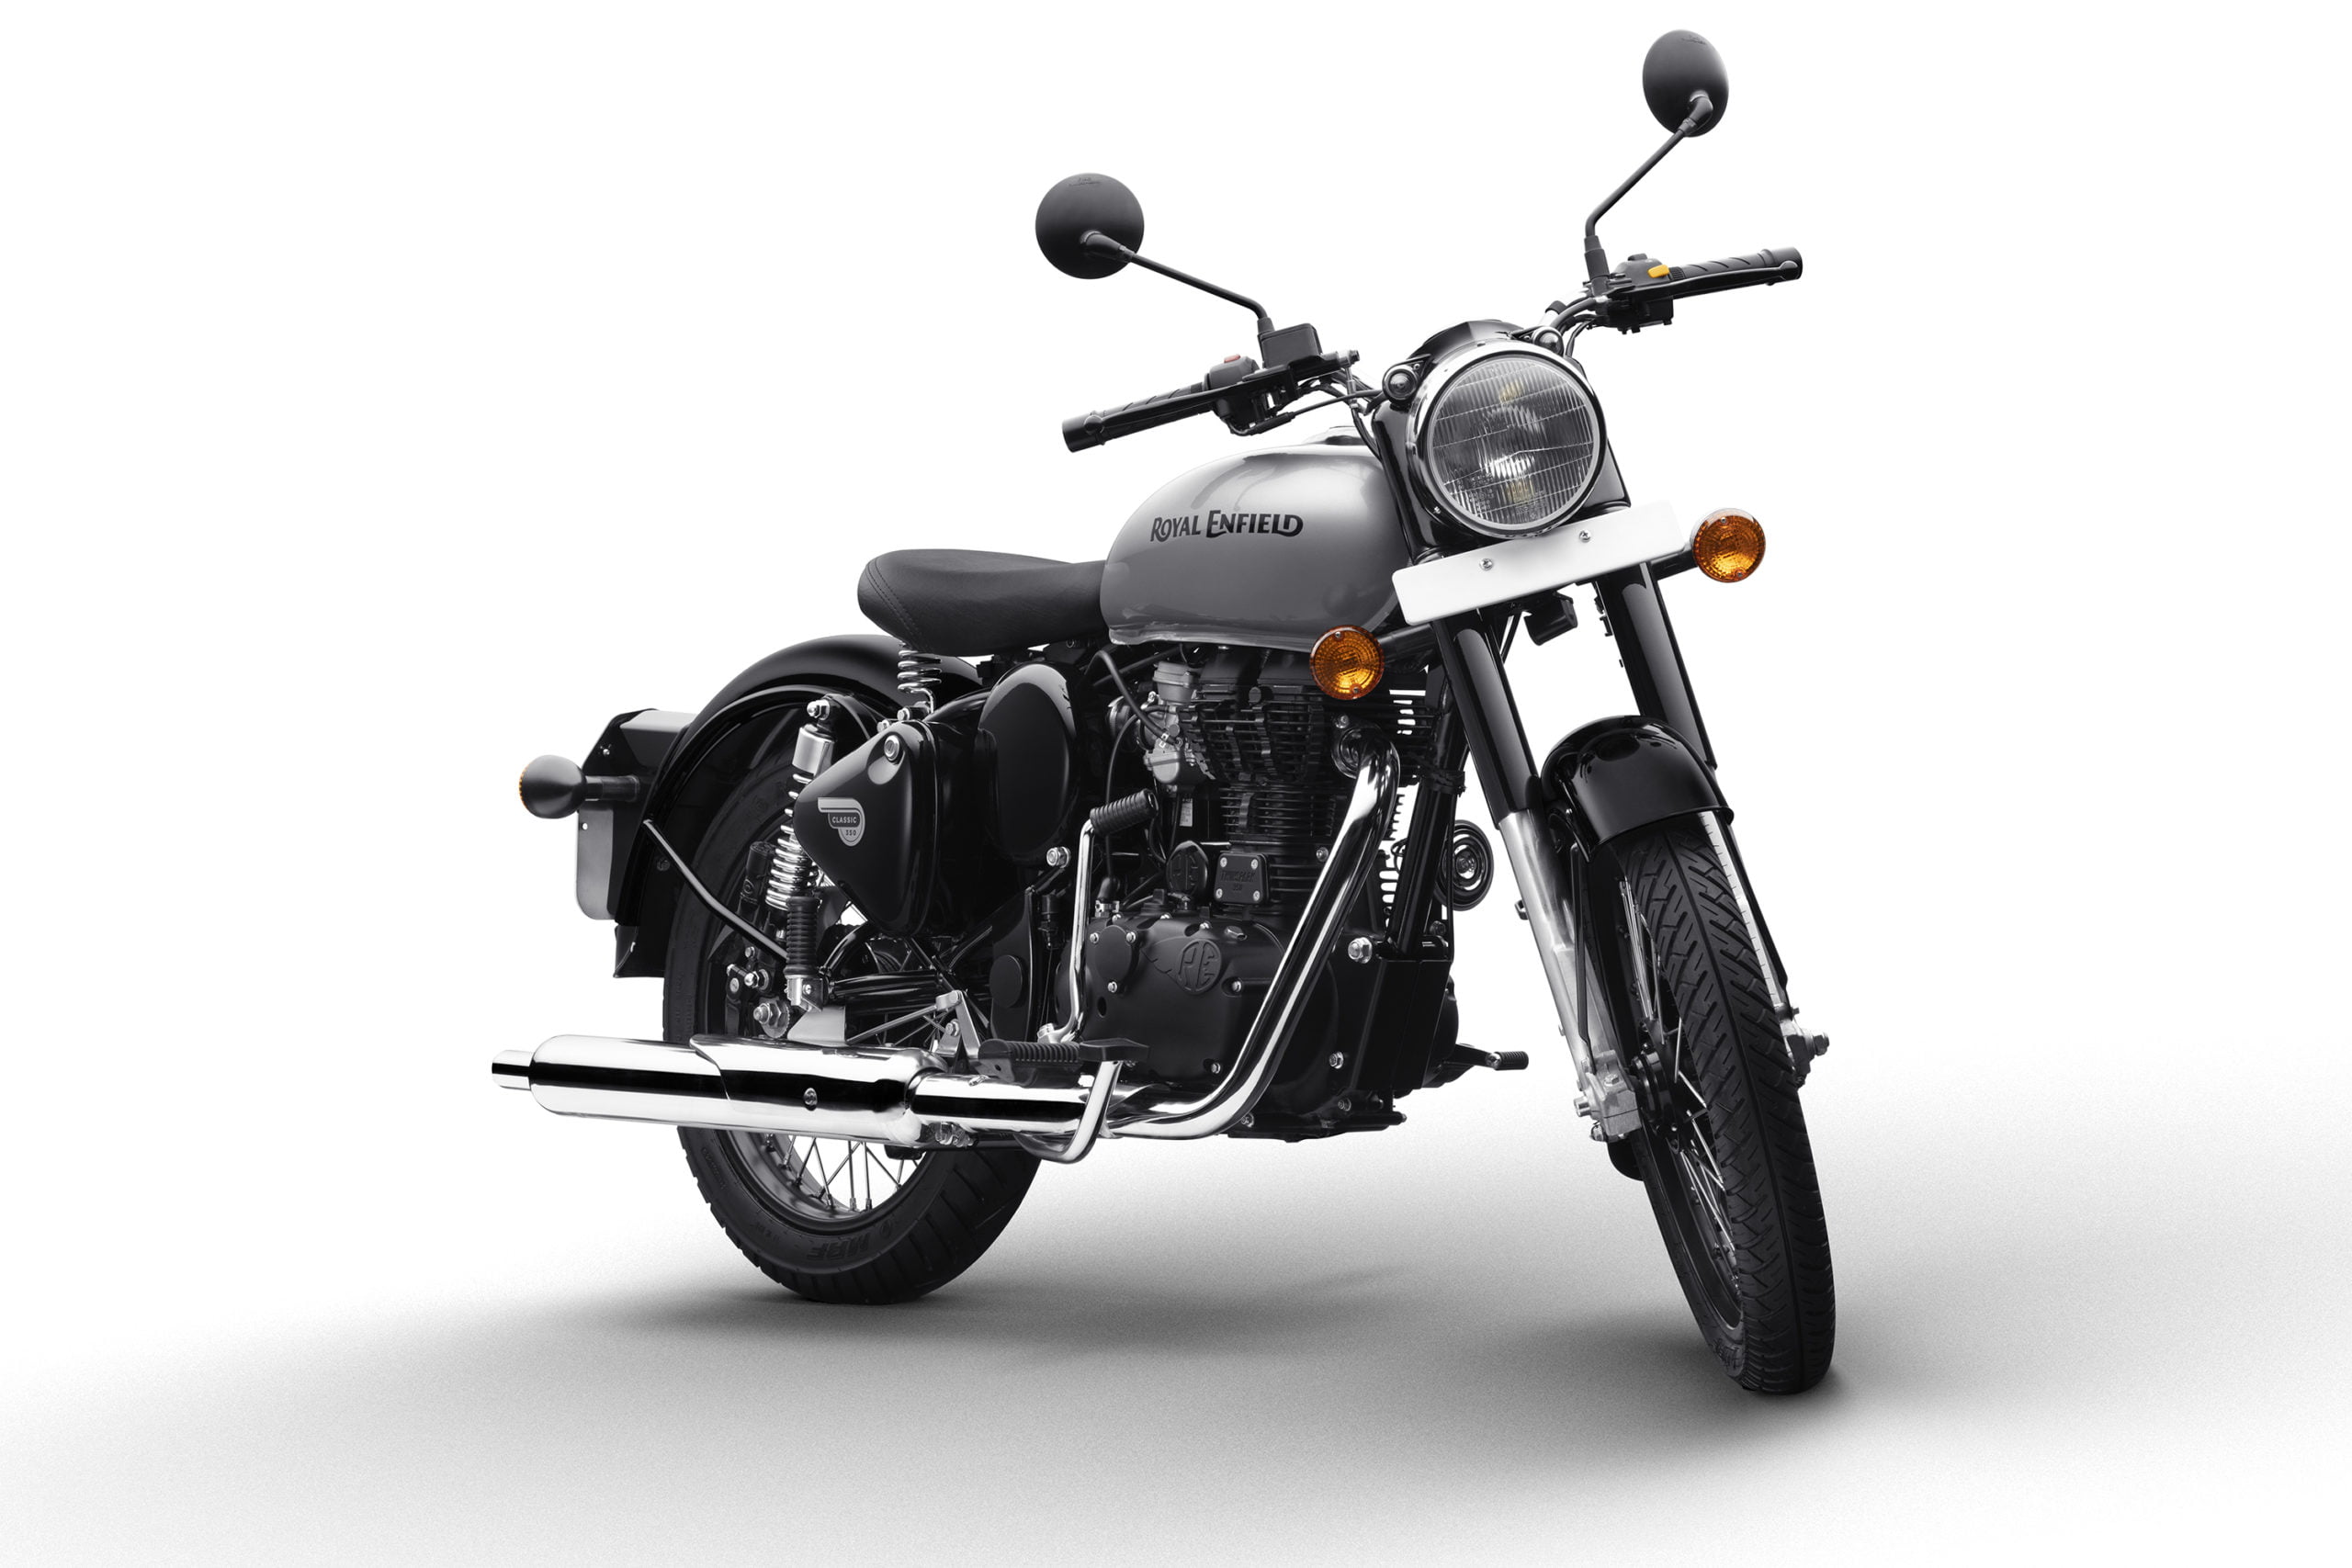 types of royal enfield classic 350